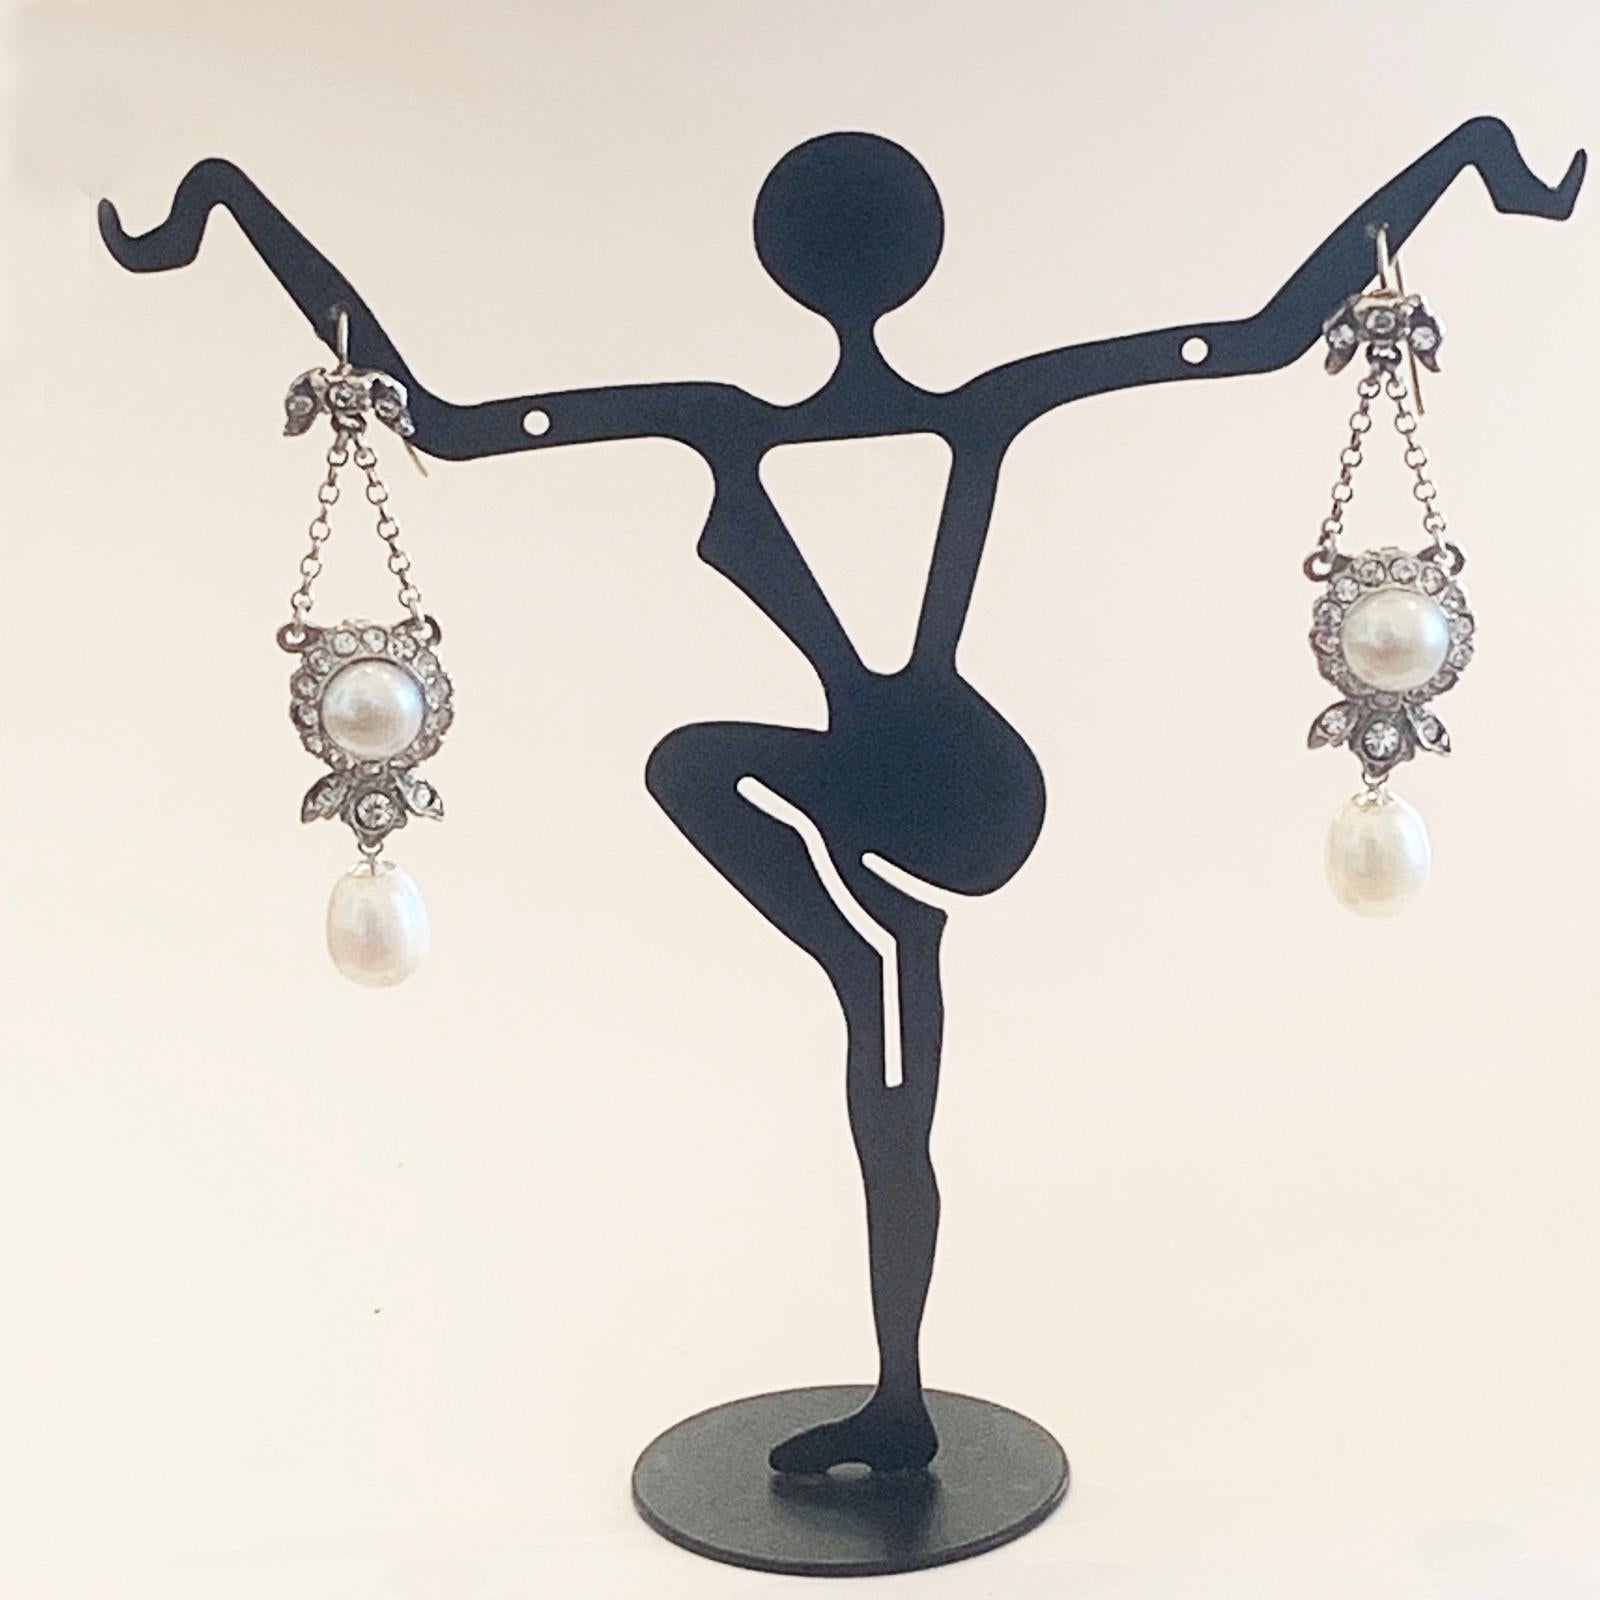 Fine Art Deco Earrings with 9ct Gold loops for the ear, Sterling silver body, set with mine cut Crystal and Cultured Pearls. The upper post section supports the lower component that swings on 2 silver chains, and another lower pearl that swings